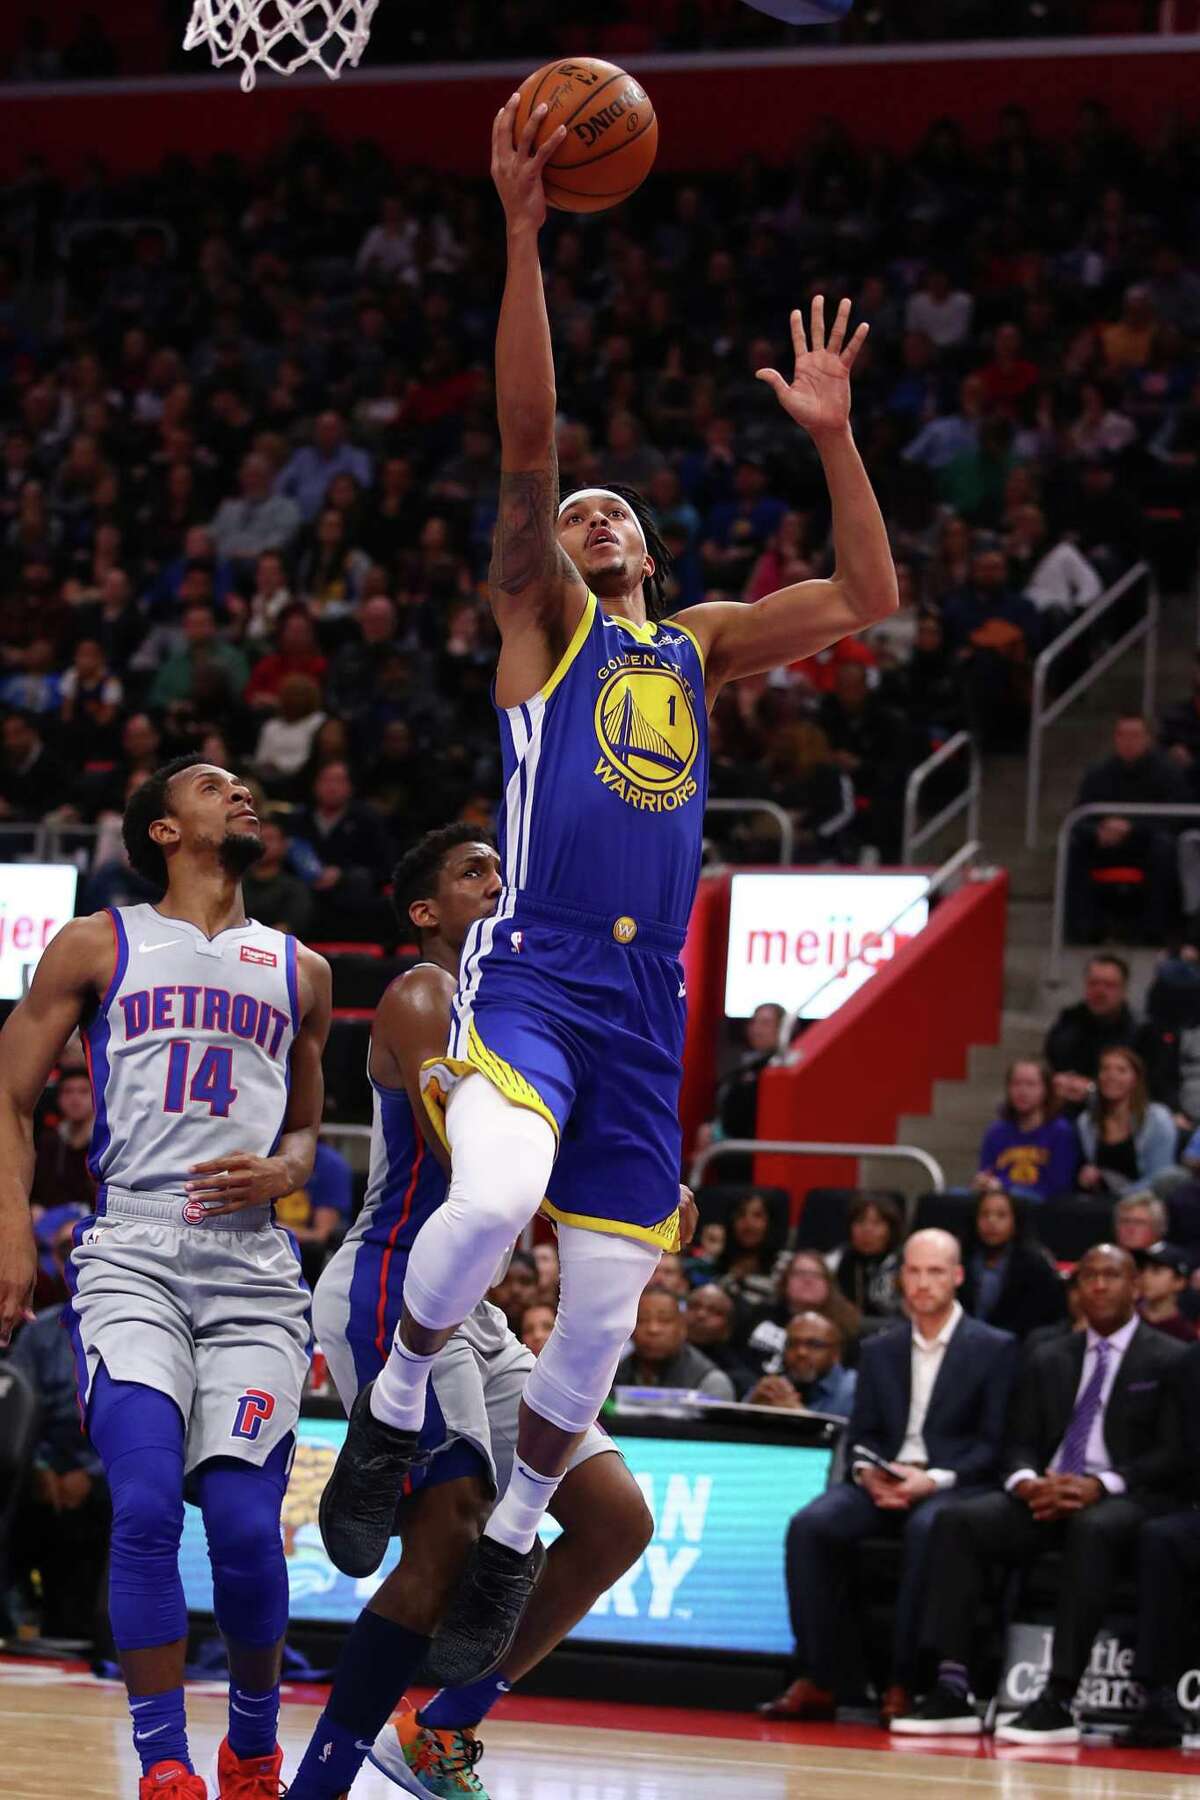 DETROIT, MICHIGAN - DECEMBER 01: Damion Lee #1 of the Golden State Warriors drives to the basket past Ish Smith #14 of the Detroit Pistons during the first half at Little Caesars Arena on December 01, 2018 in Detroit, Michigan. NOTE TO USER: User expressly acknowledges and agrees that, by downloading and or using this photograph, User is consenting to the terms and conditions of the Getty Images License Agreement. (Photo by Gregory Shamus/Getty Images)